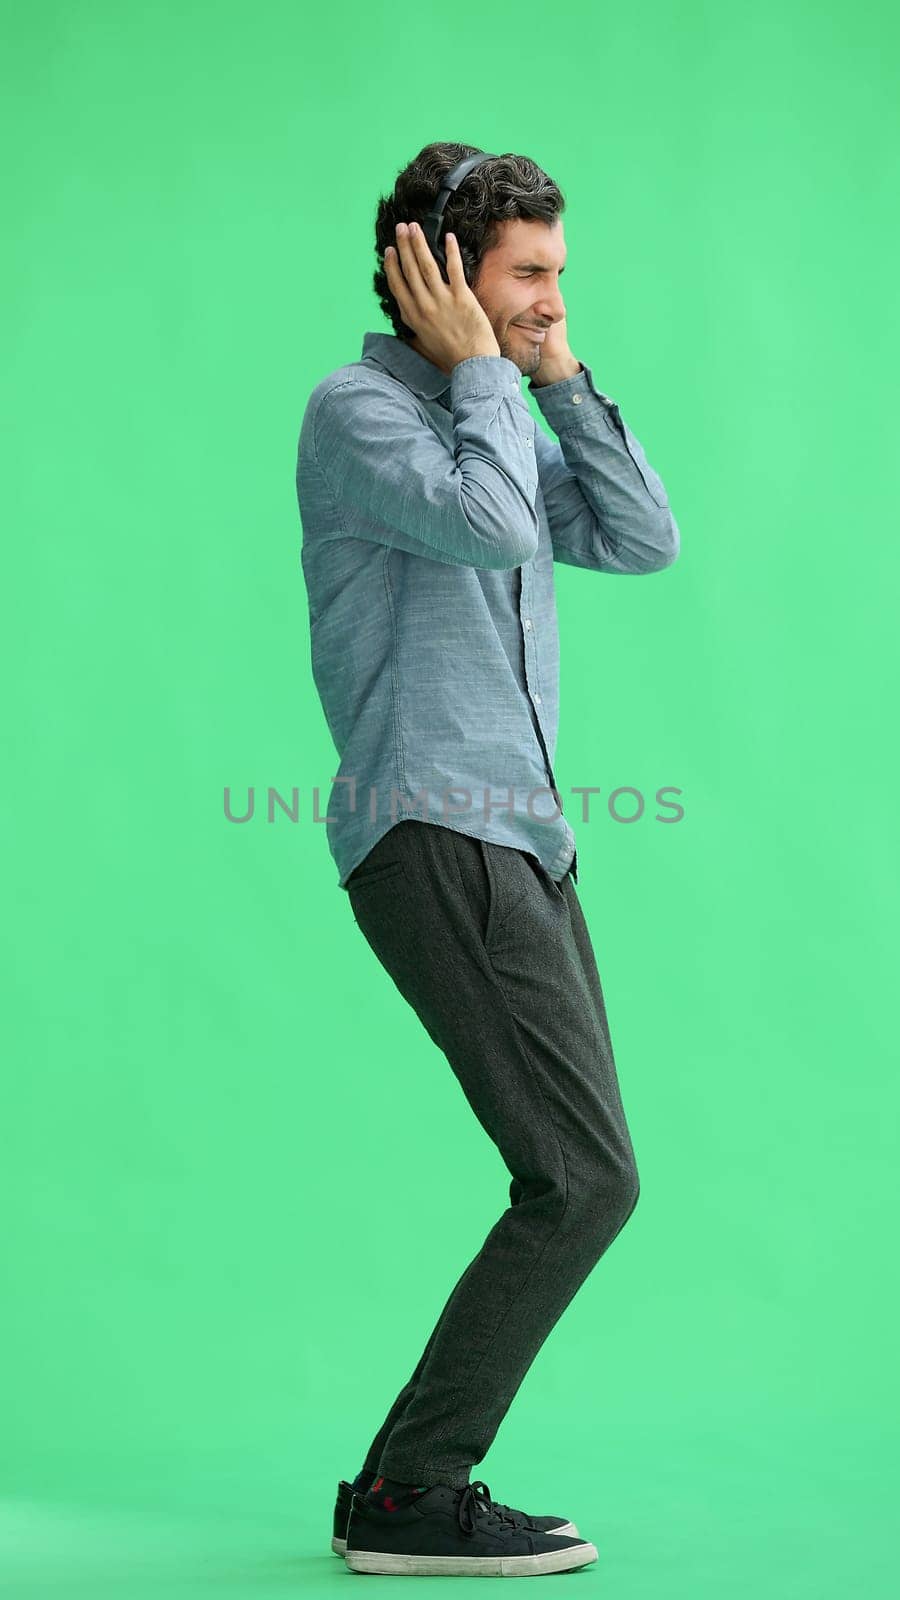 man in full growth. isolated on green background wearing headphones dancing.